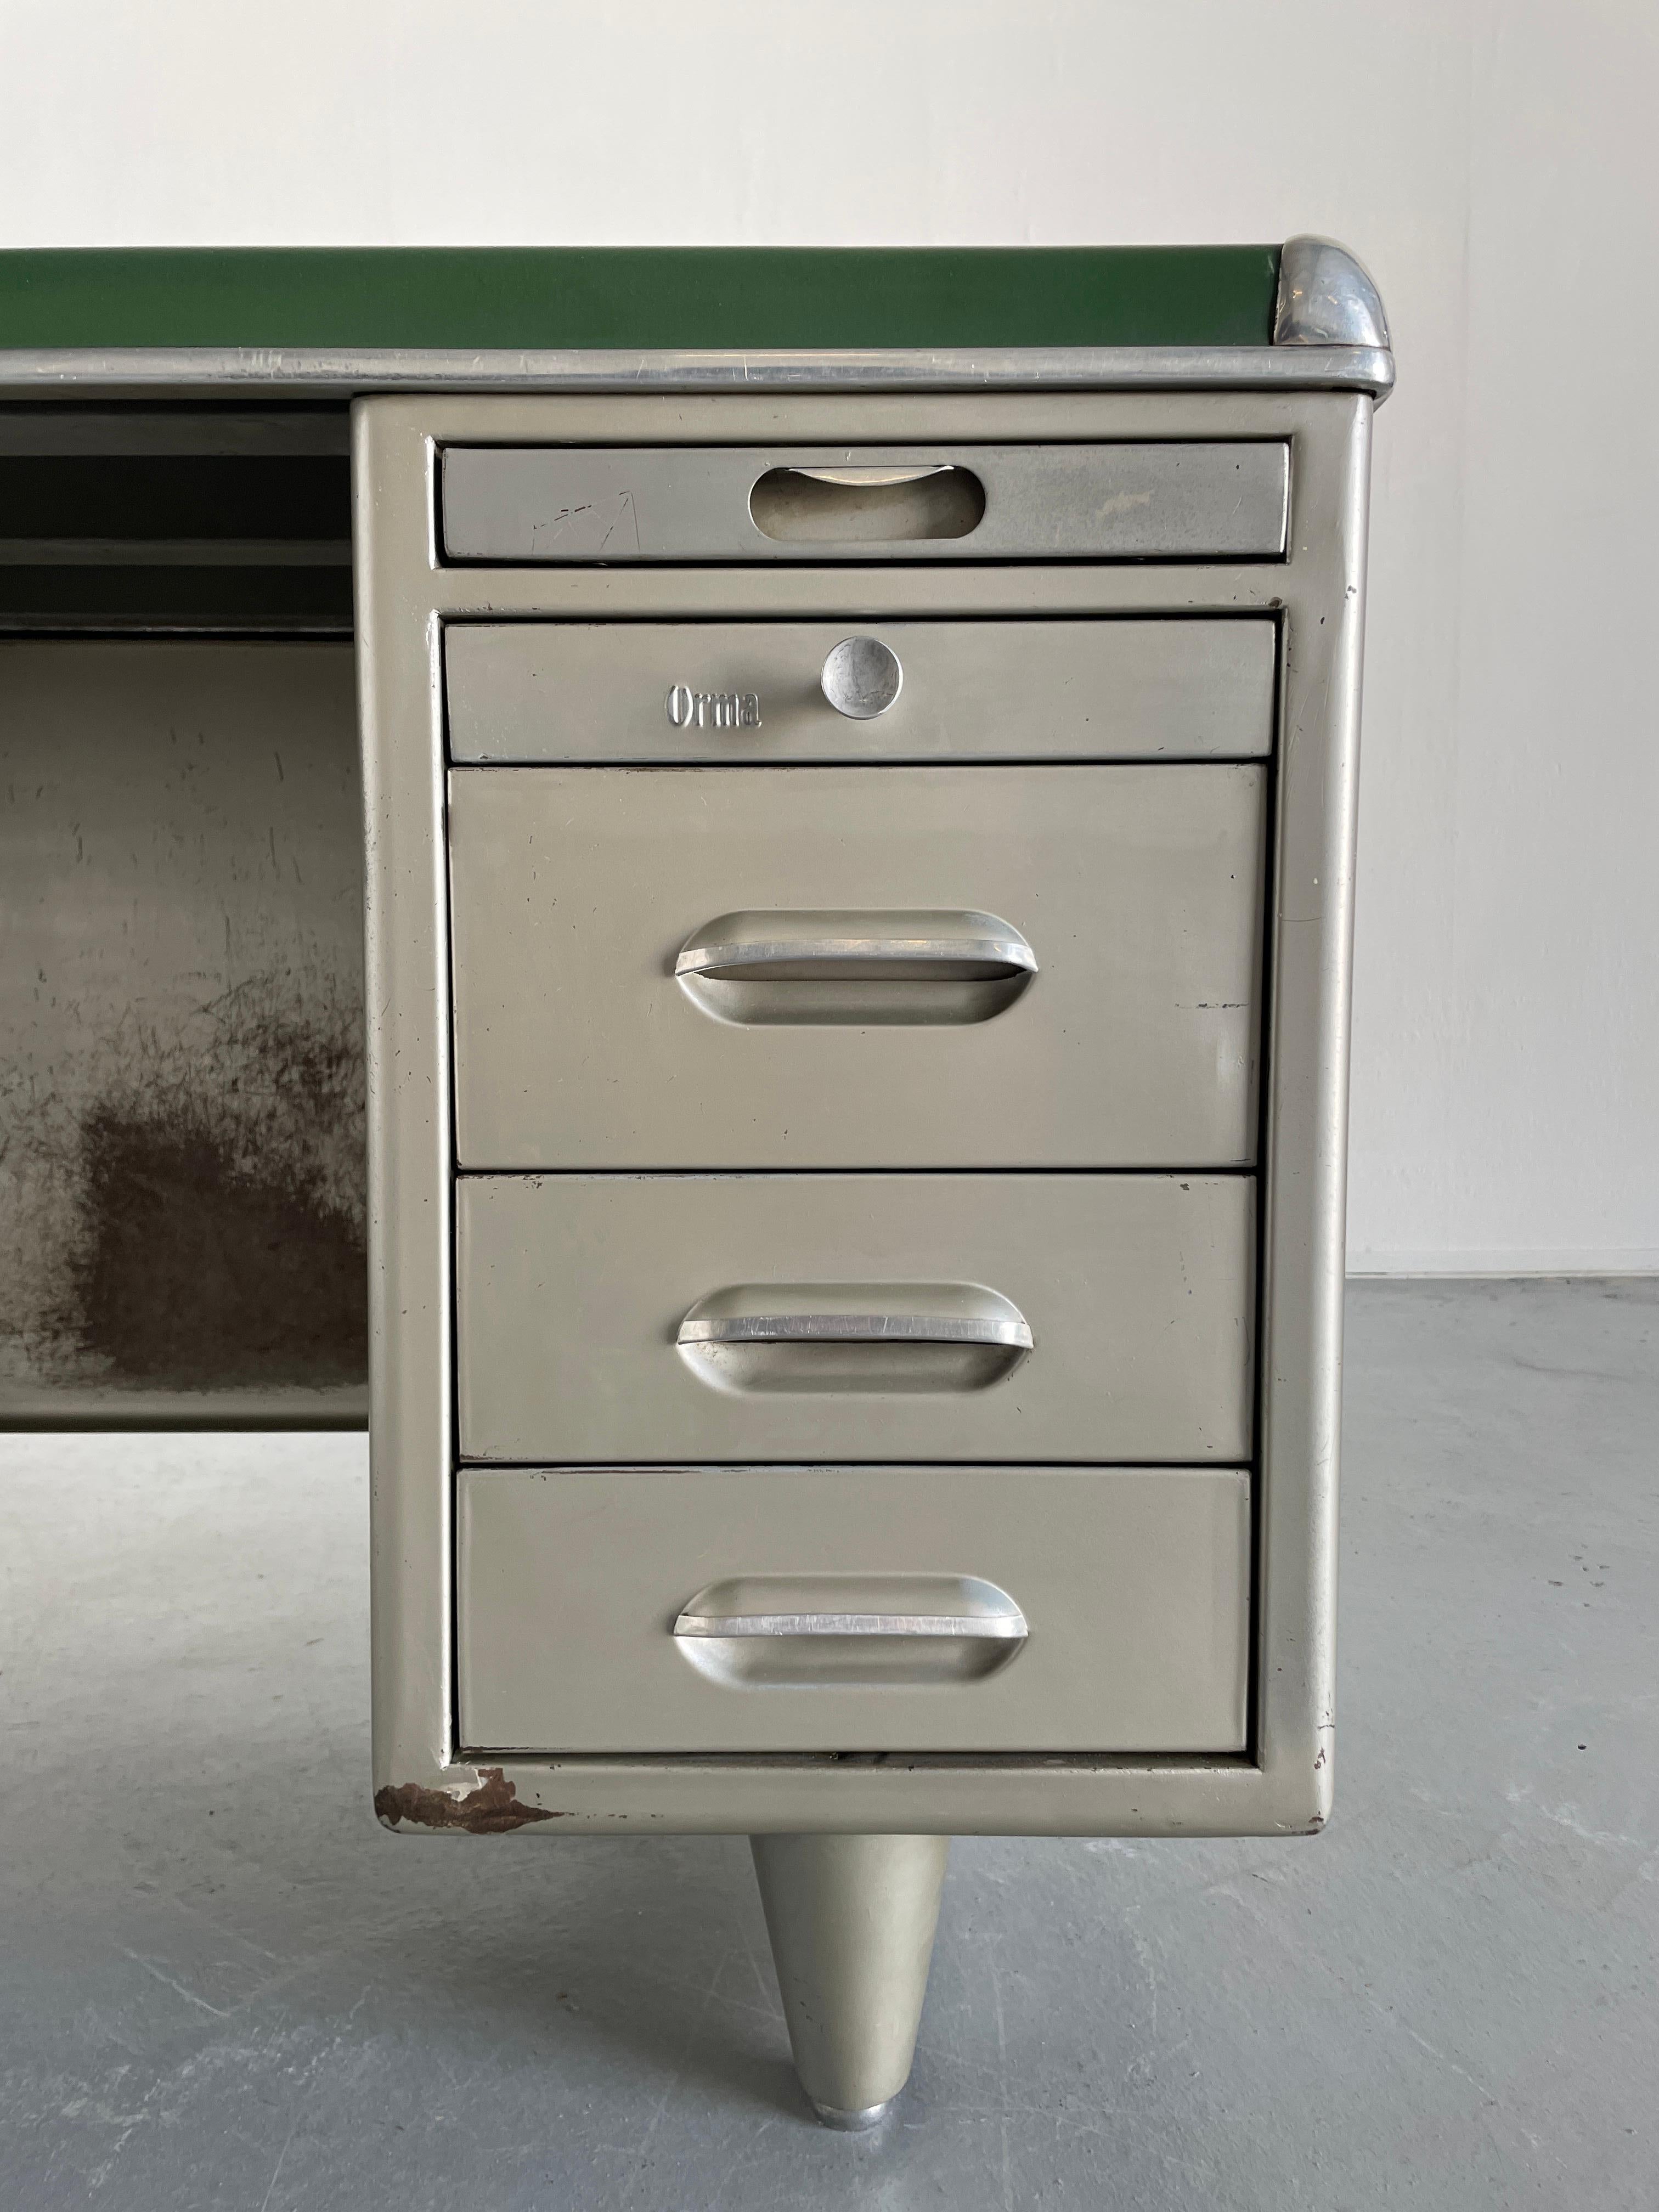 1950s Industrial Single Bank Steel Tanker Desk by Orma Milano, Italy For Sale 4